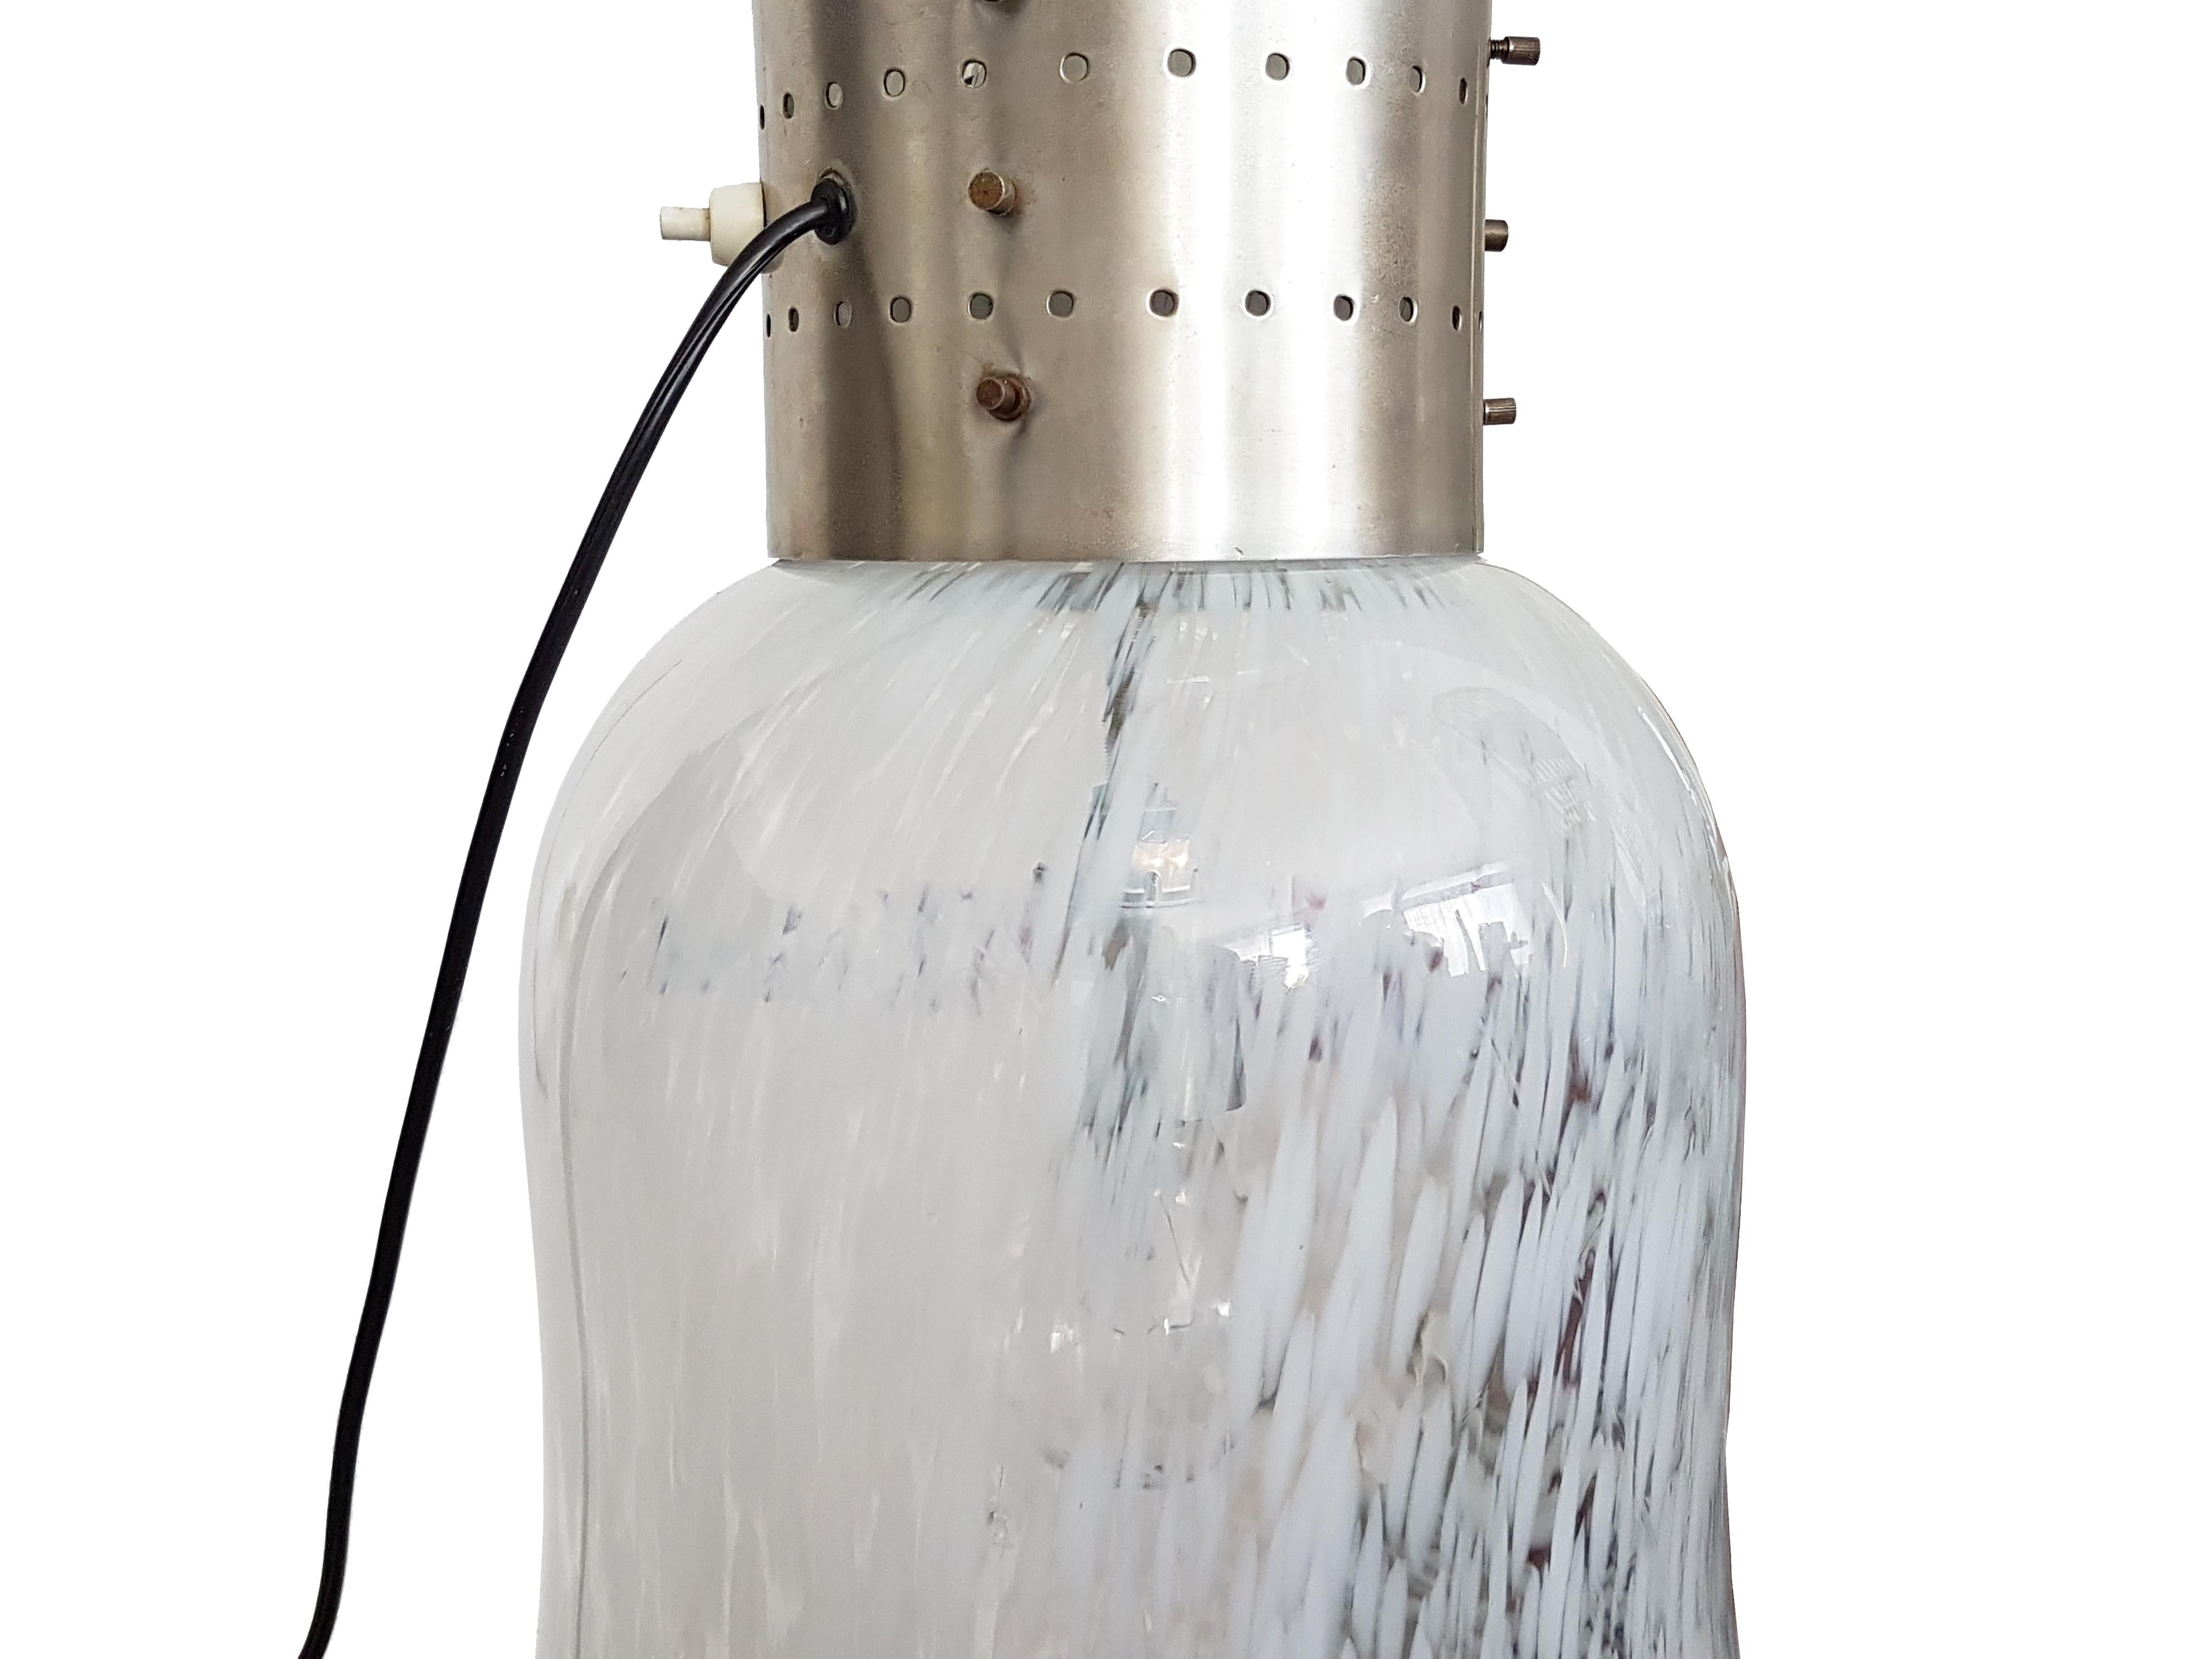 Hand-Crafted Italian Murano Clear and White Glass Shades, 1960s Floor Lamp For Sale